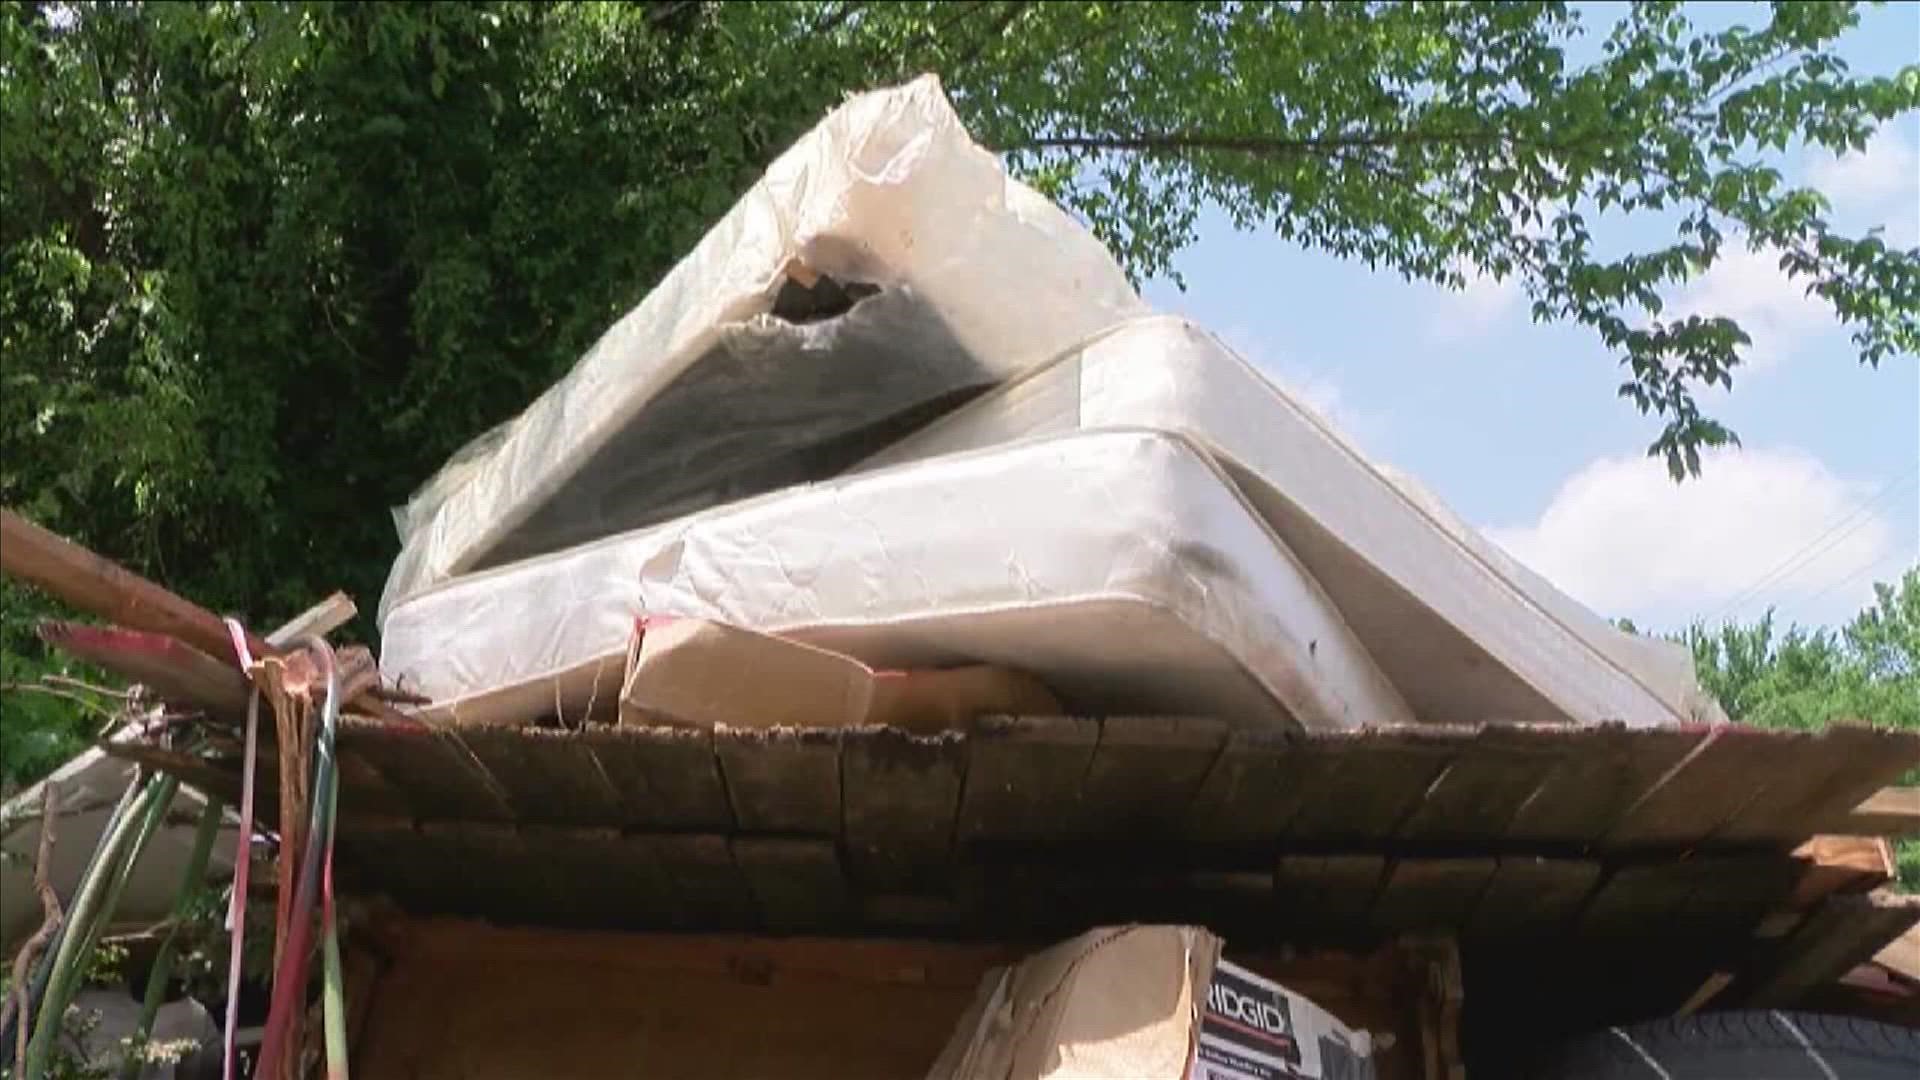 Illegal dumping is a major issue in the Mid-South. Here's how DeSoto County is doing its part.